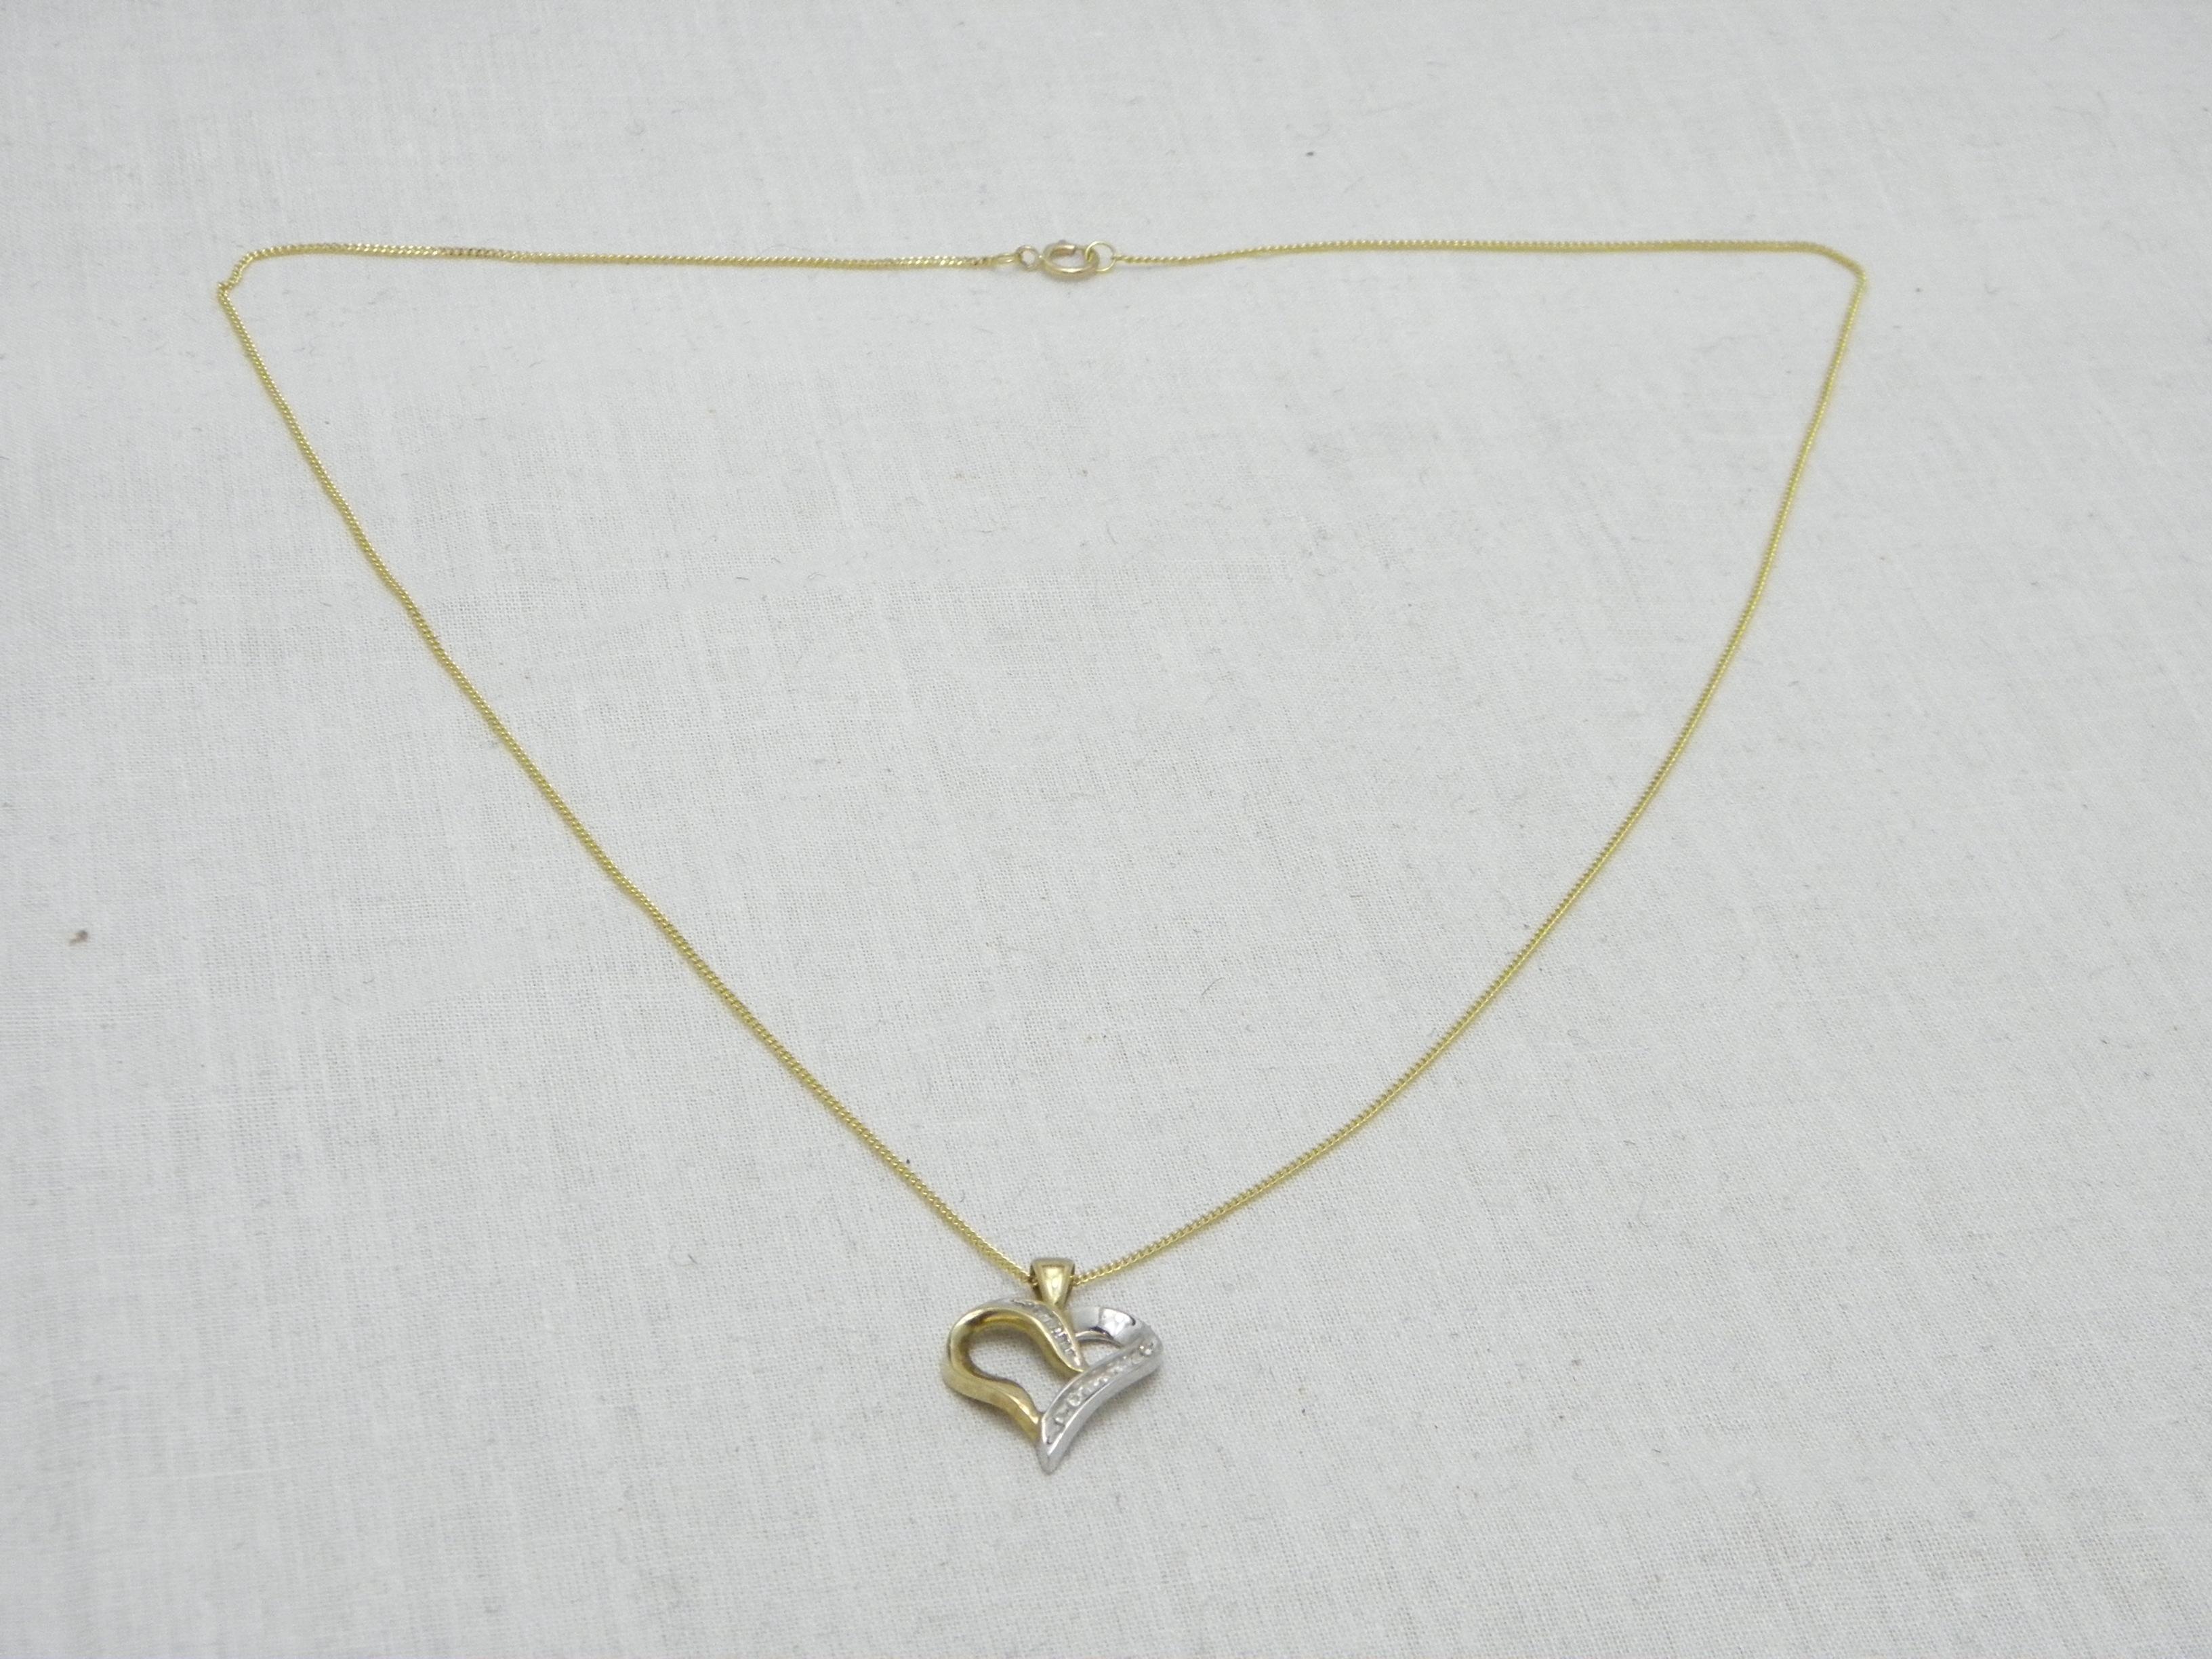 Vintage 9ct Gold 0.25 Cttw Diamond Heart Pendant Necklace Curb Chain 375 20 Inch For Sale 3